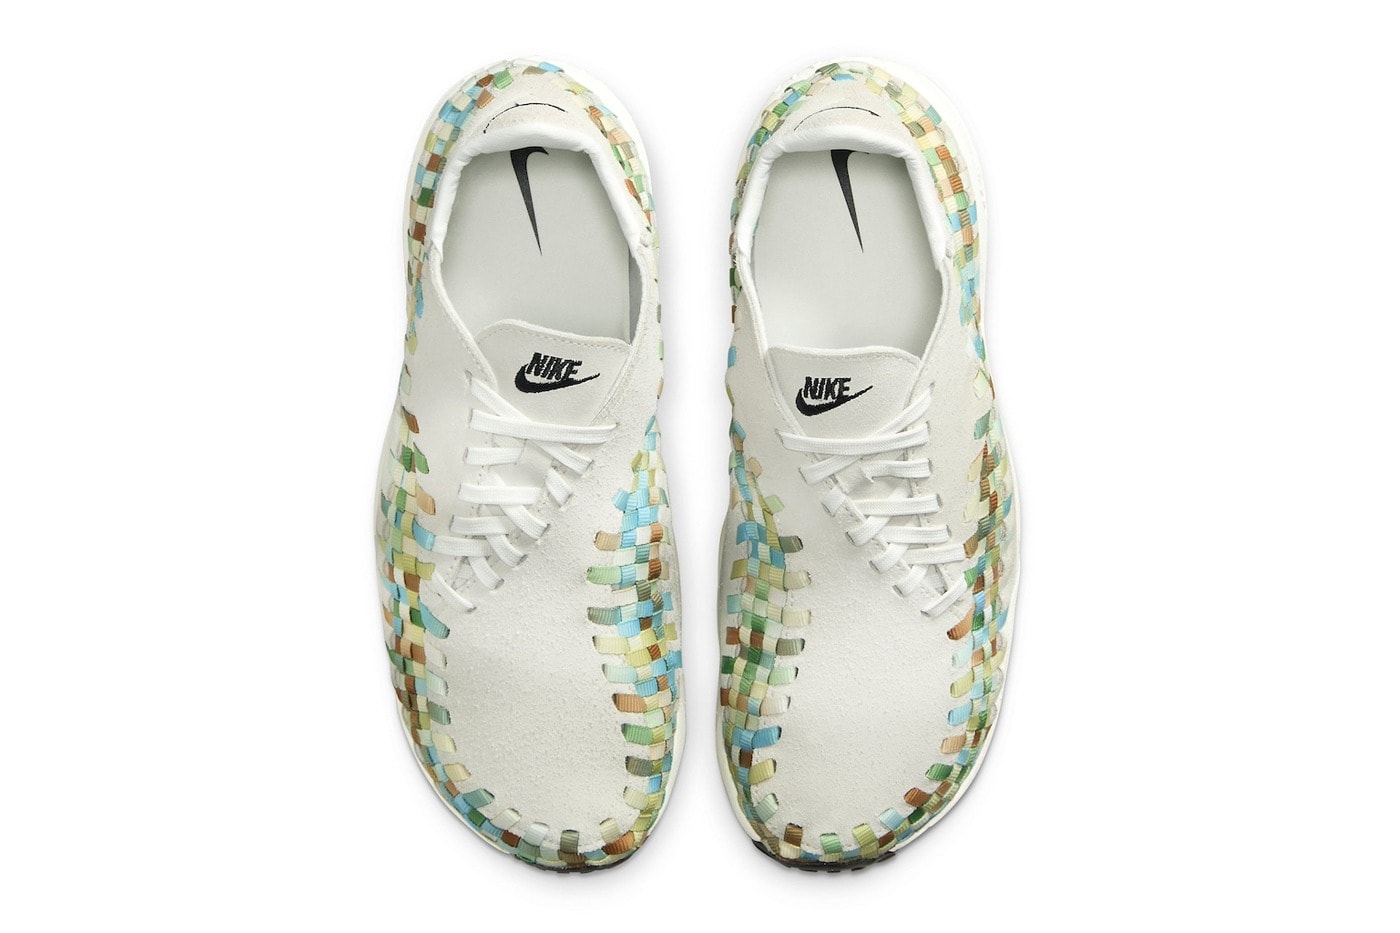 Nike 正式推出 Air Footscape Woven 全新配色「Rainbow」